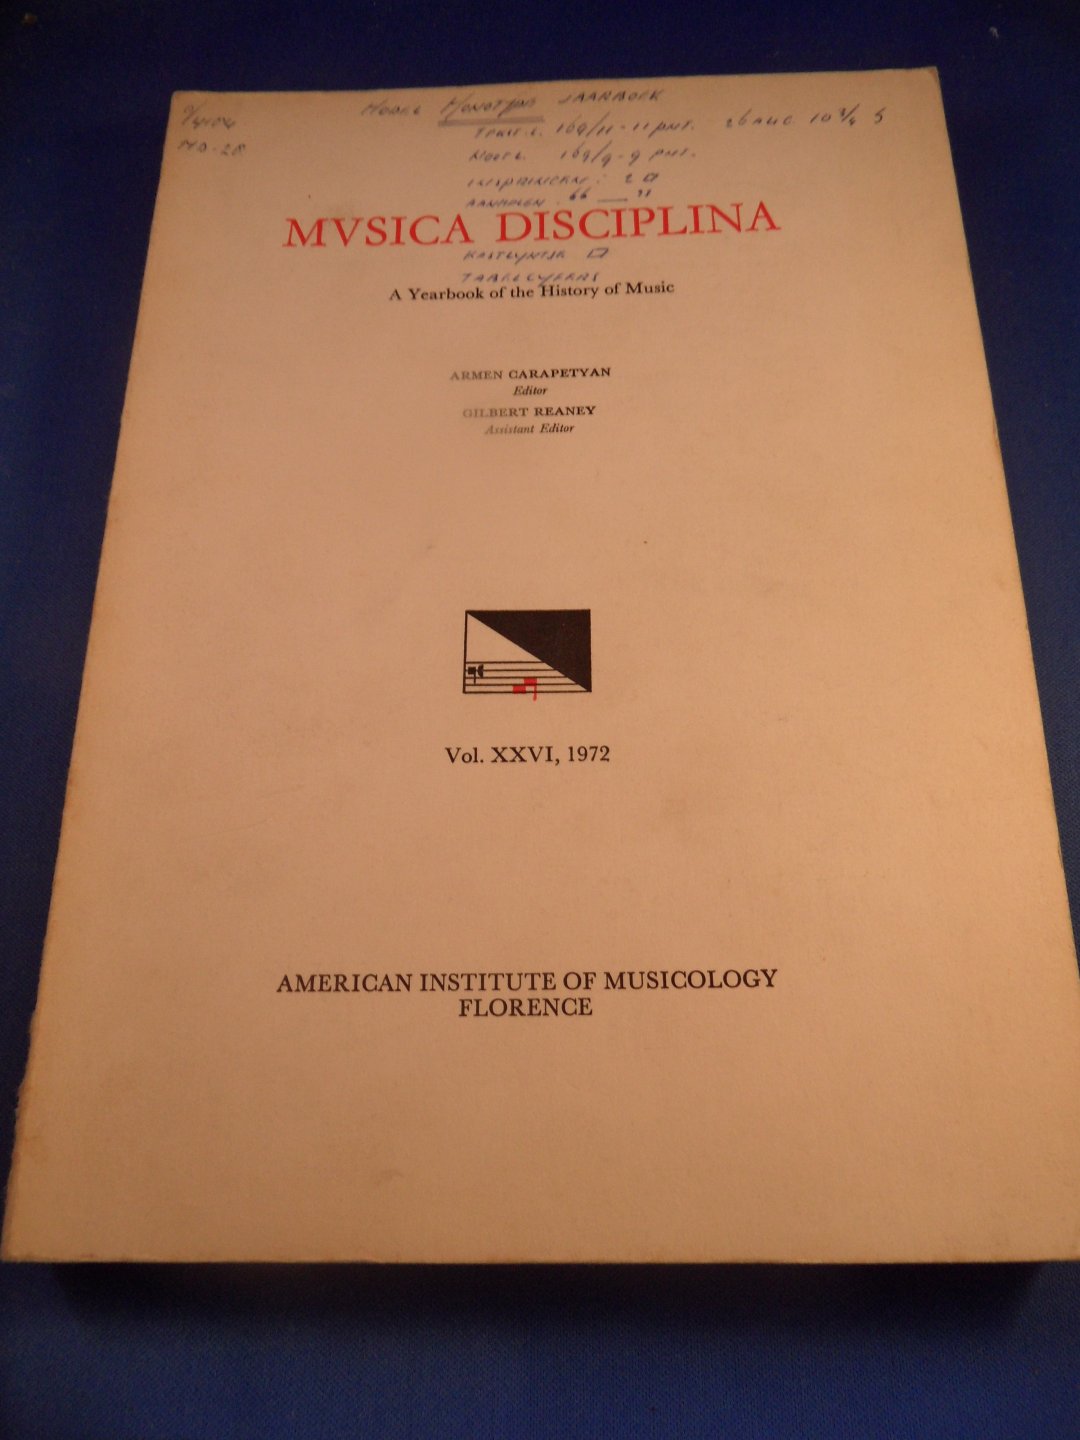 Carapeytyan, Armen (ed.) - Musica Disciplina. A yearbook of the History of music. Vol. Xxvi, 1972